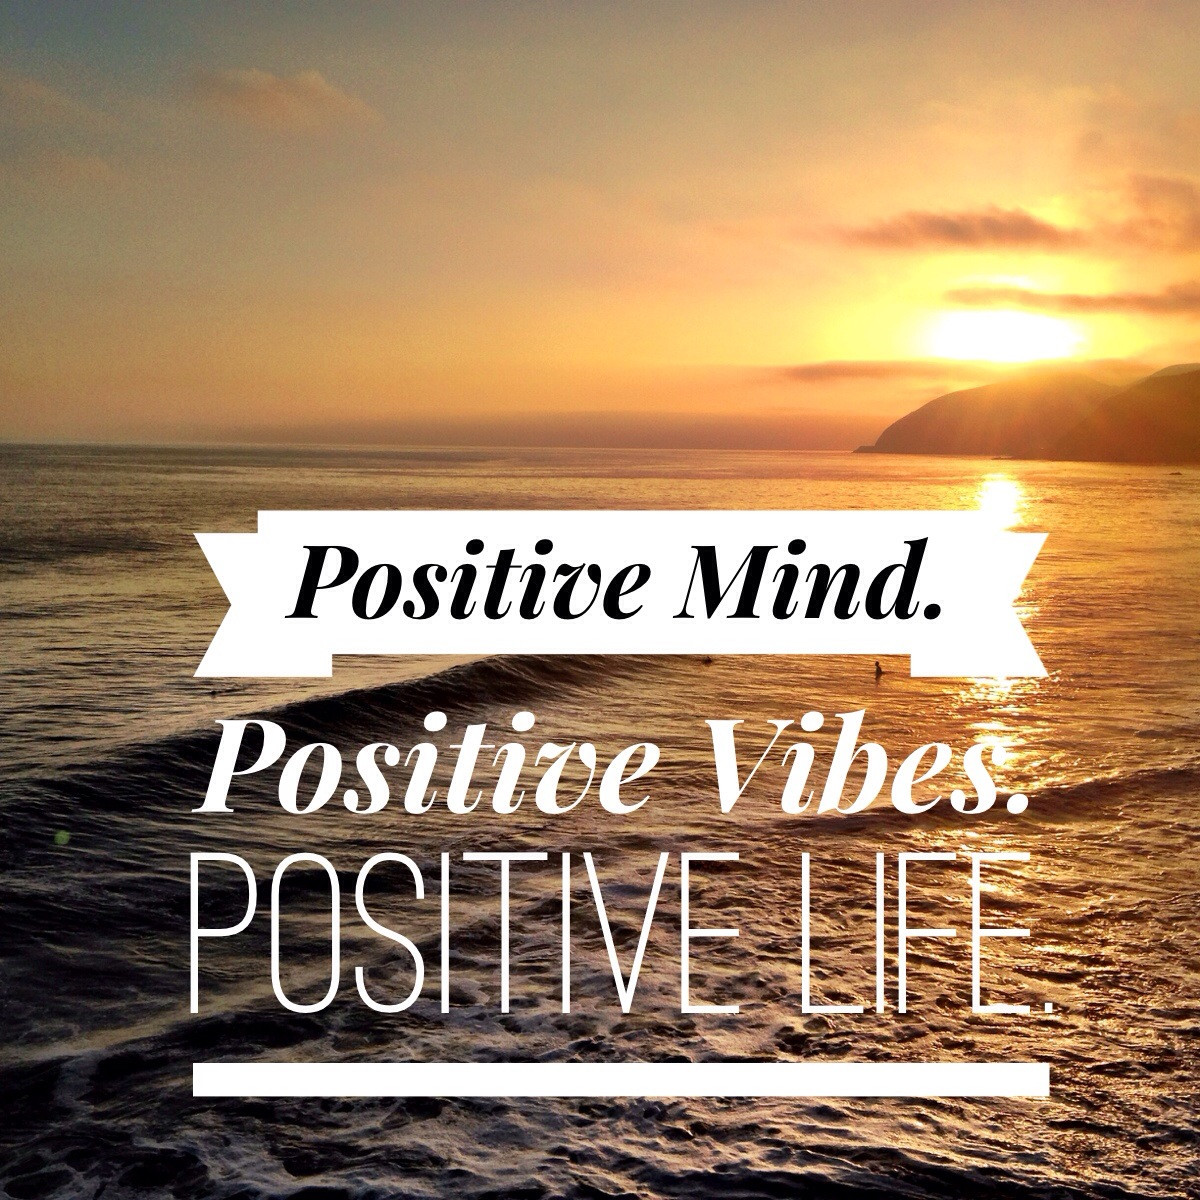 Positive Life Quotes
 Positive Mind Positive Life Quotes QuotesGram